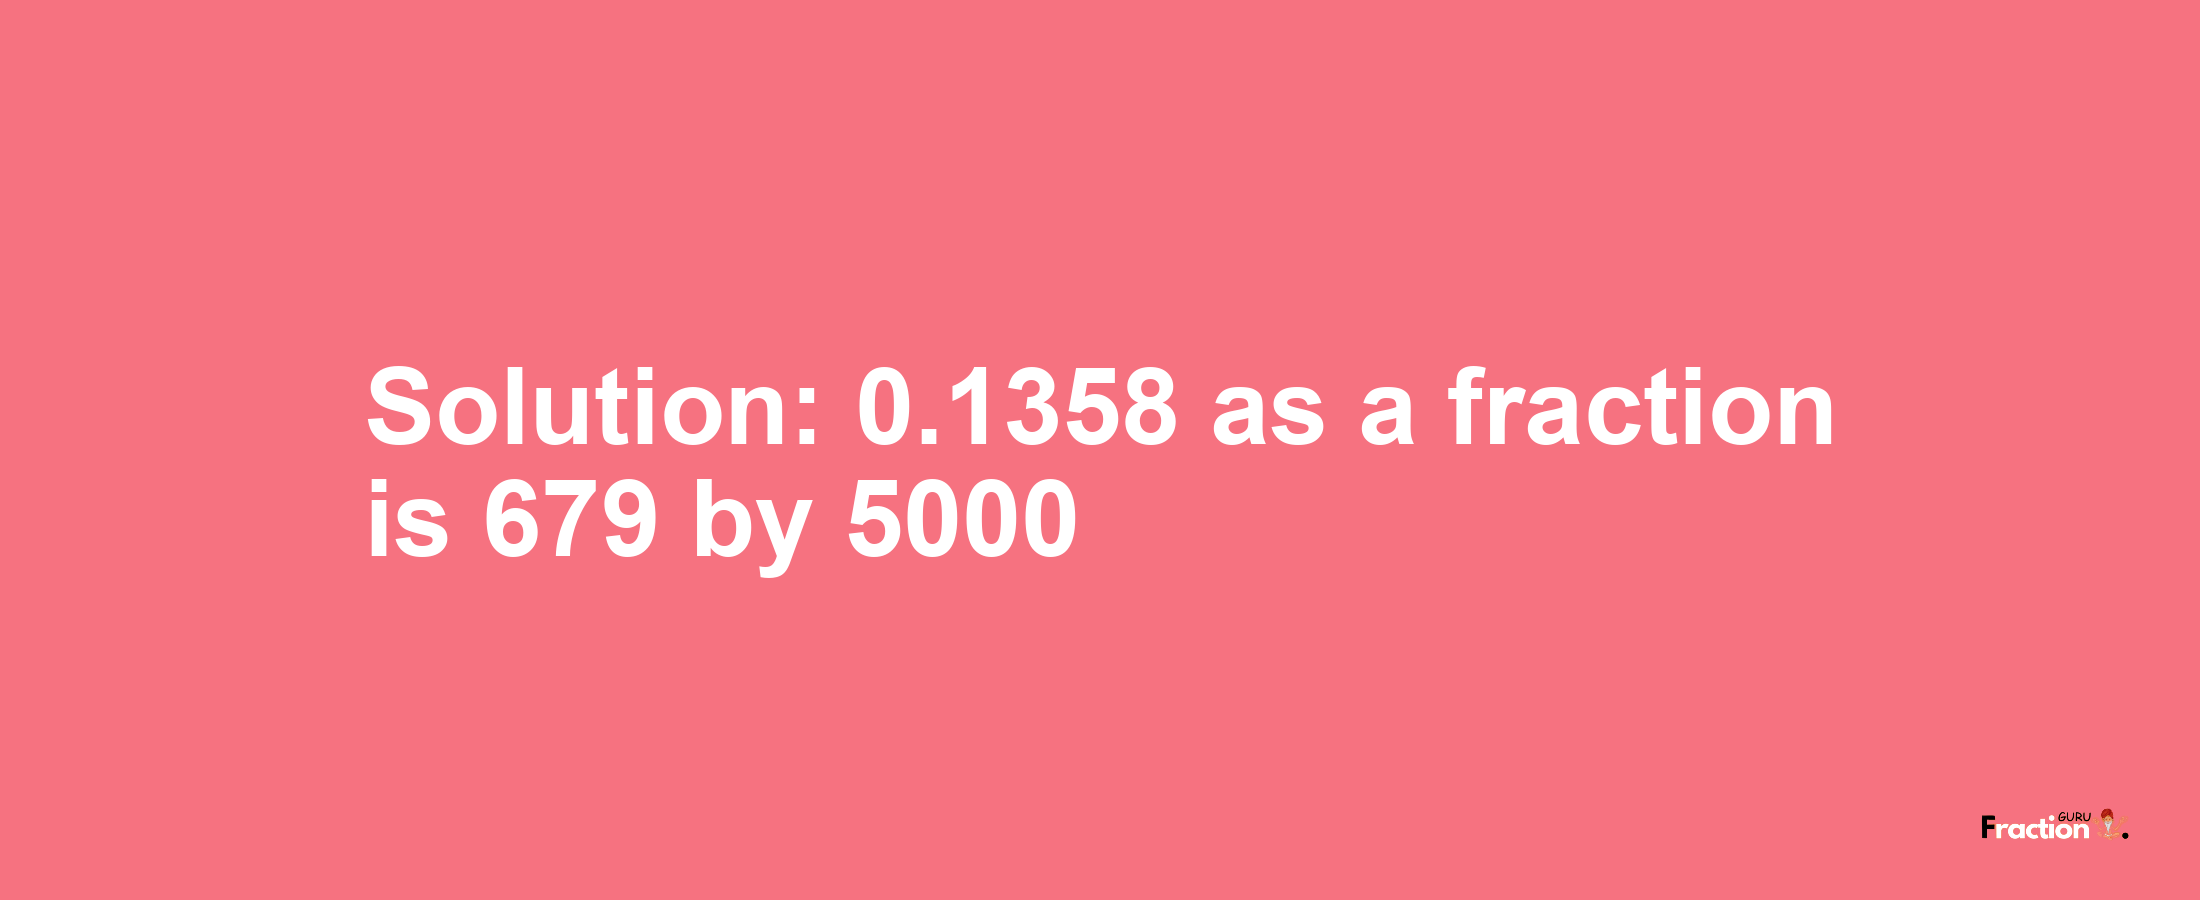 Solution:0.1358 as a fraction is 679/5000